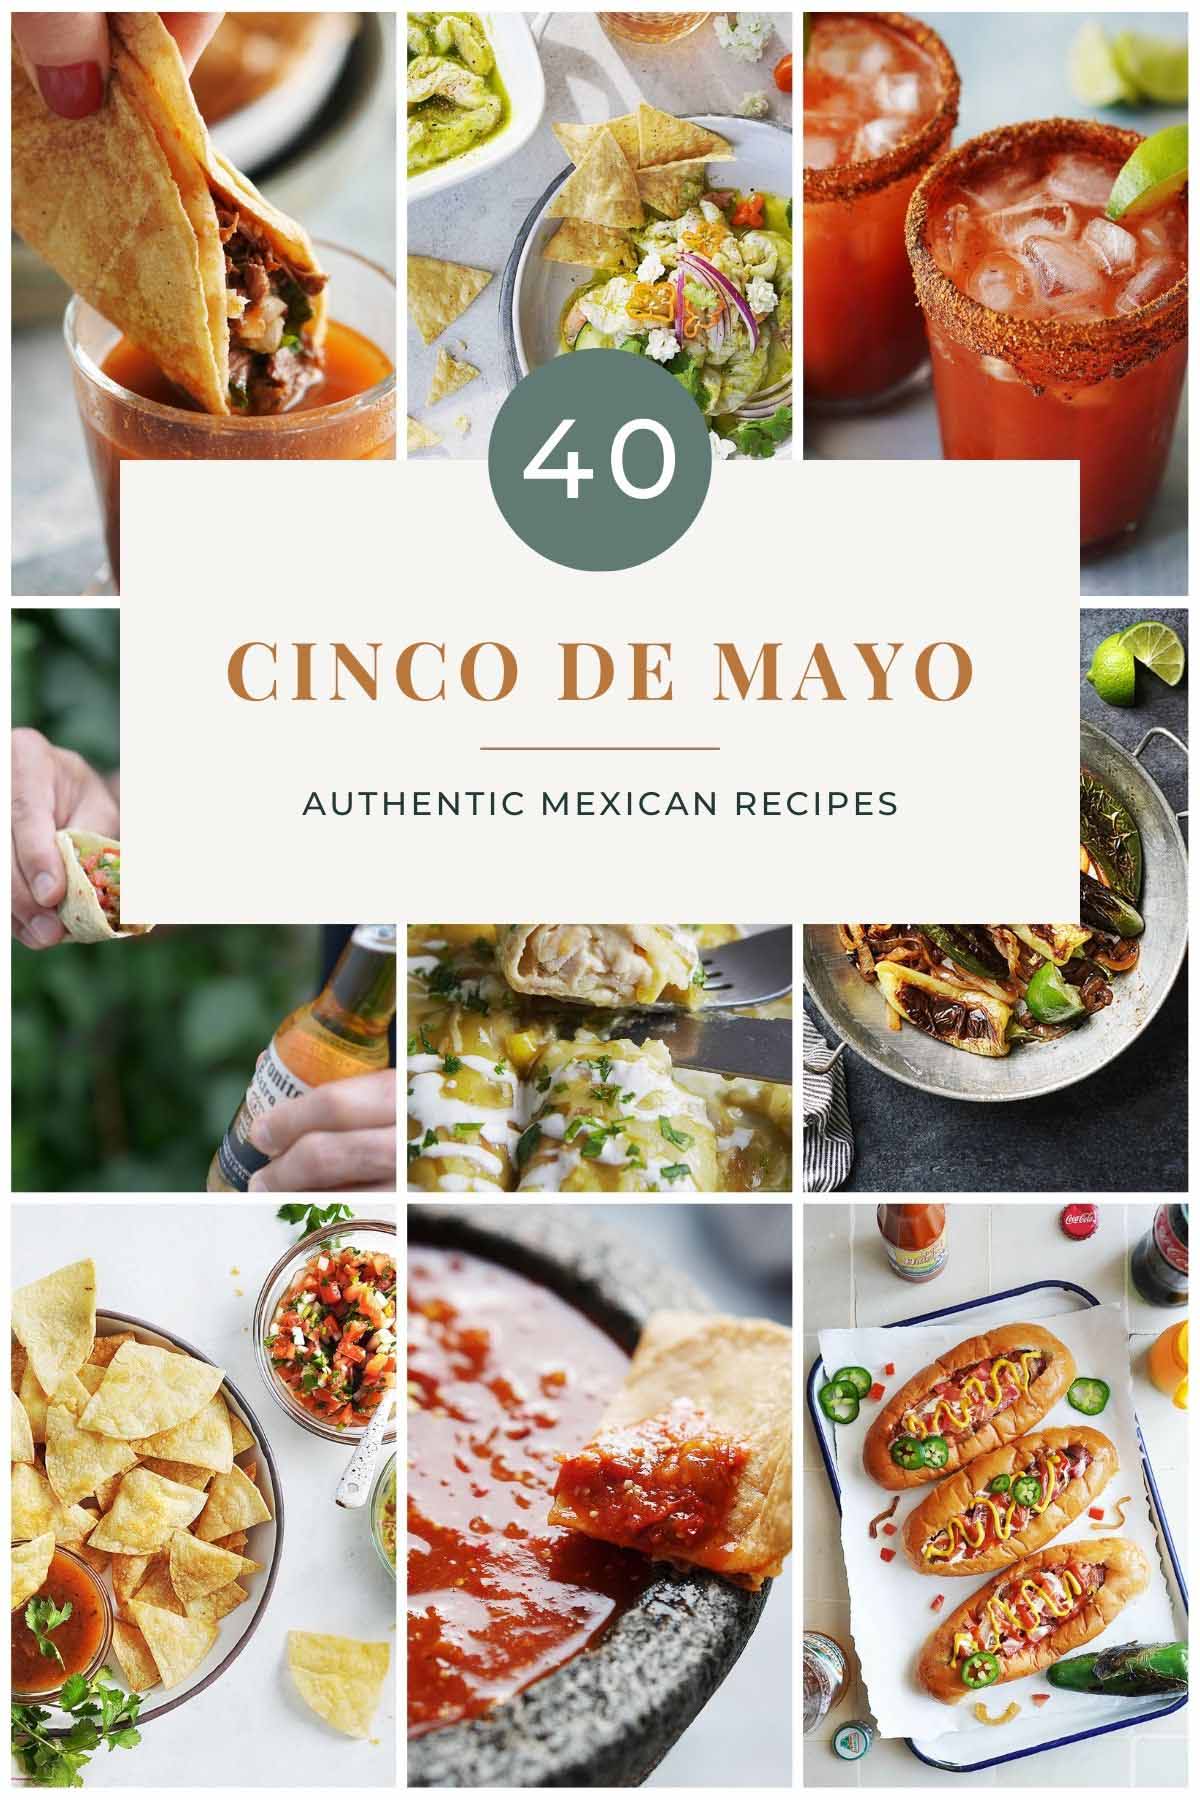 A collage of images for cinco de mayo celebration.